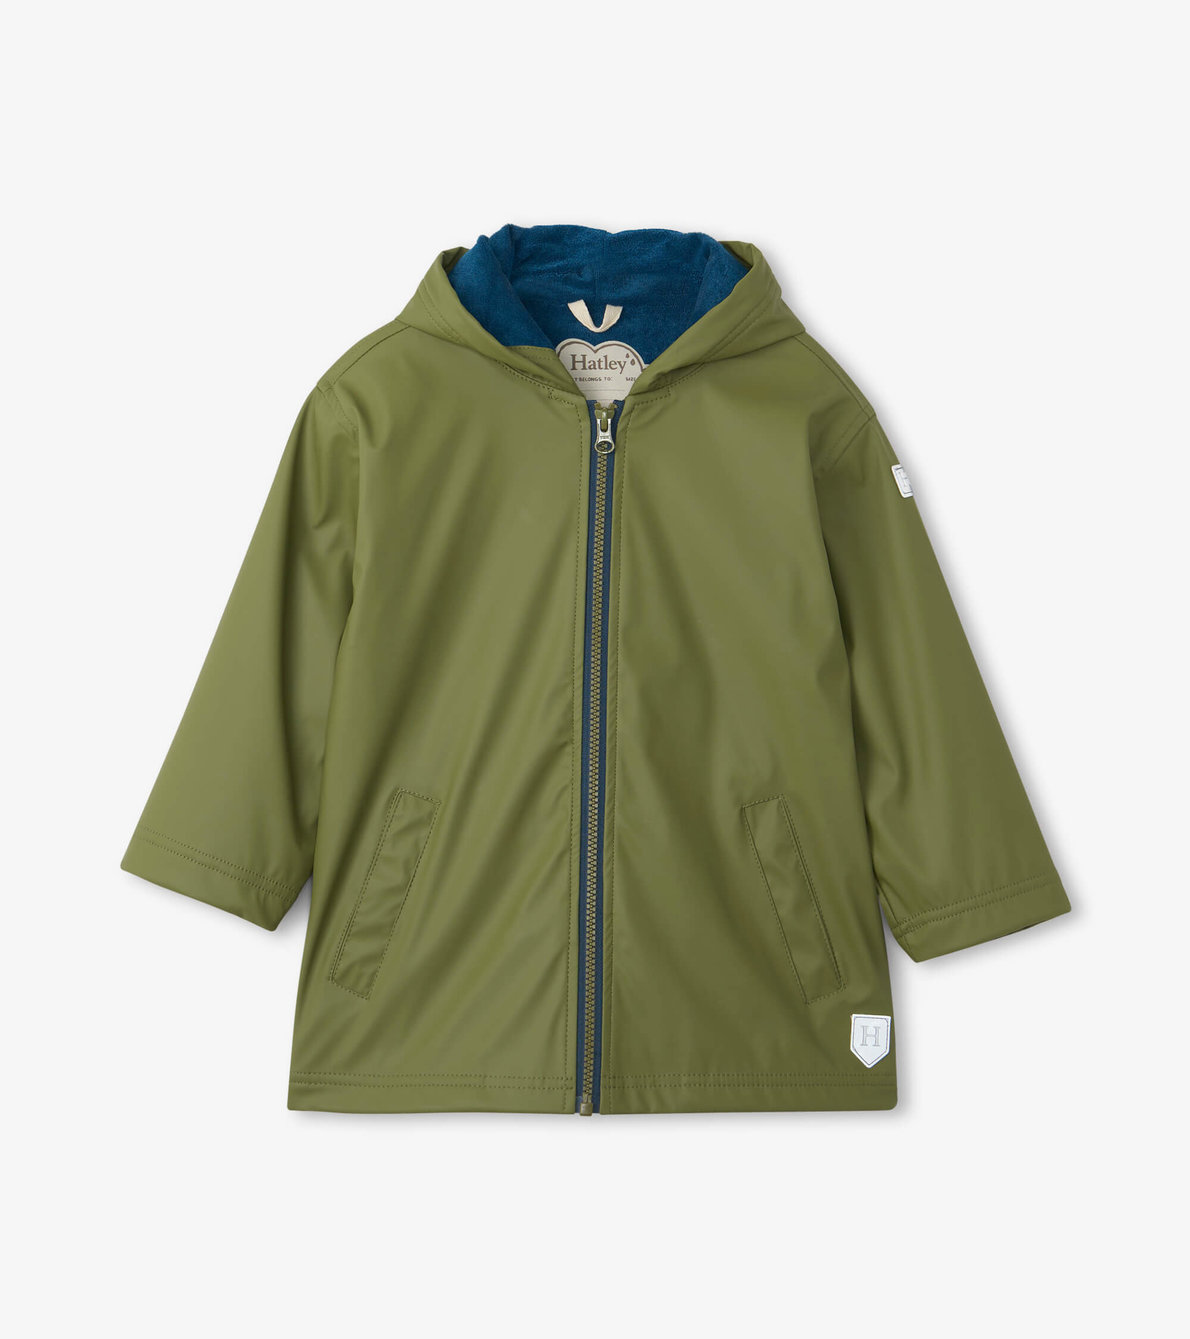 View larger image of Boys Forest Green Zip-Up Raincoat